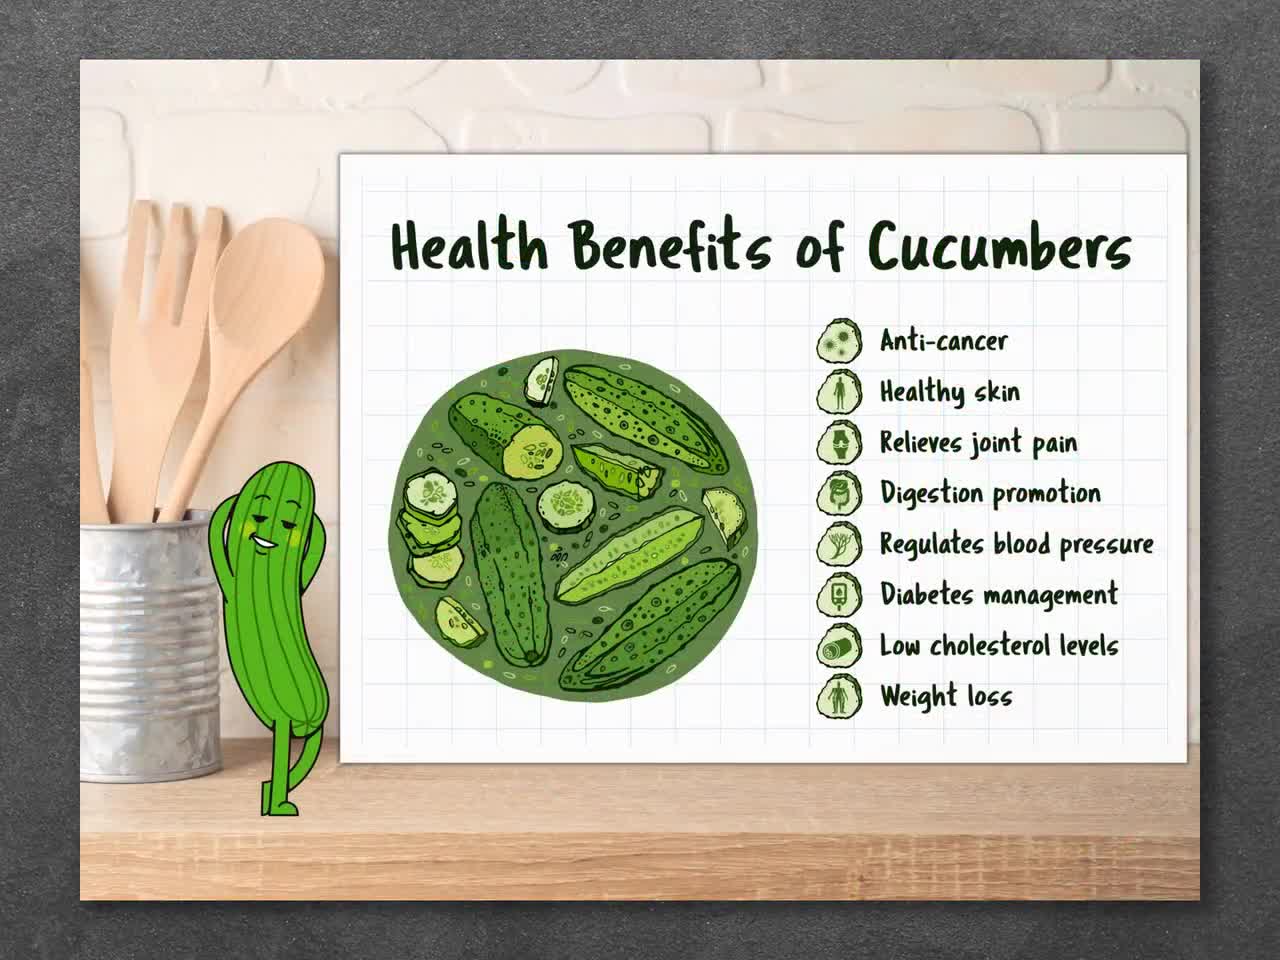 Cucumbers Information and Facts